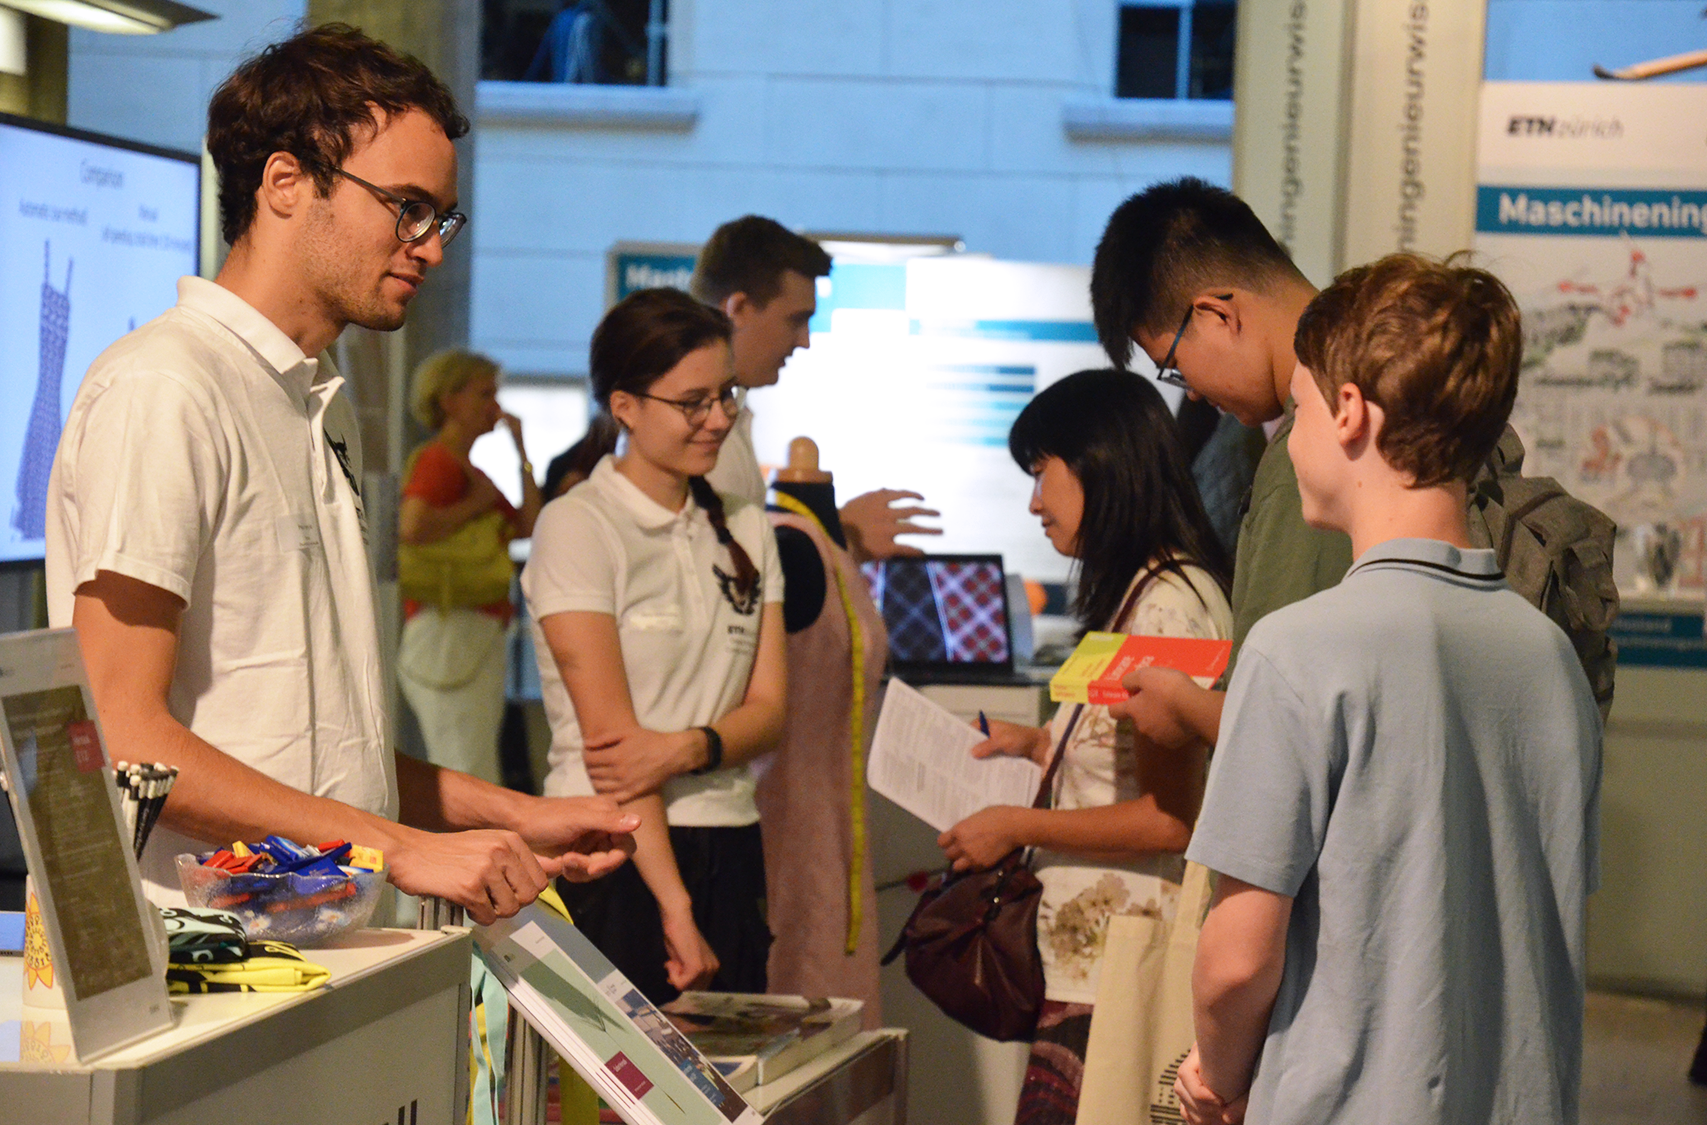 A student and a young pupil are standing opposite each other. The student is standing next to a bar table on which a bowl of chocolate is placed. In the background, other students are talking to visitors.